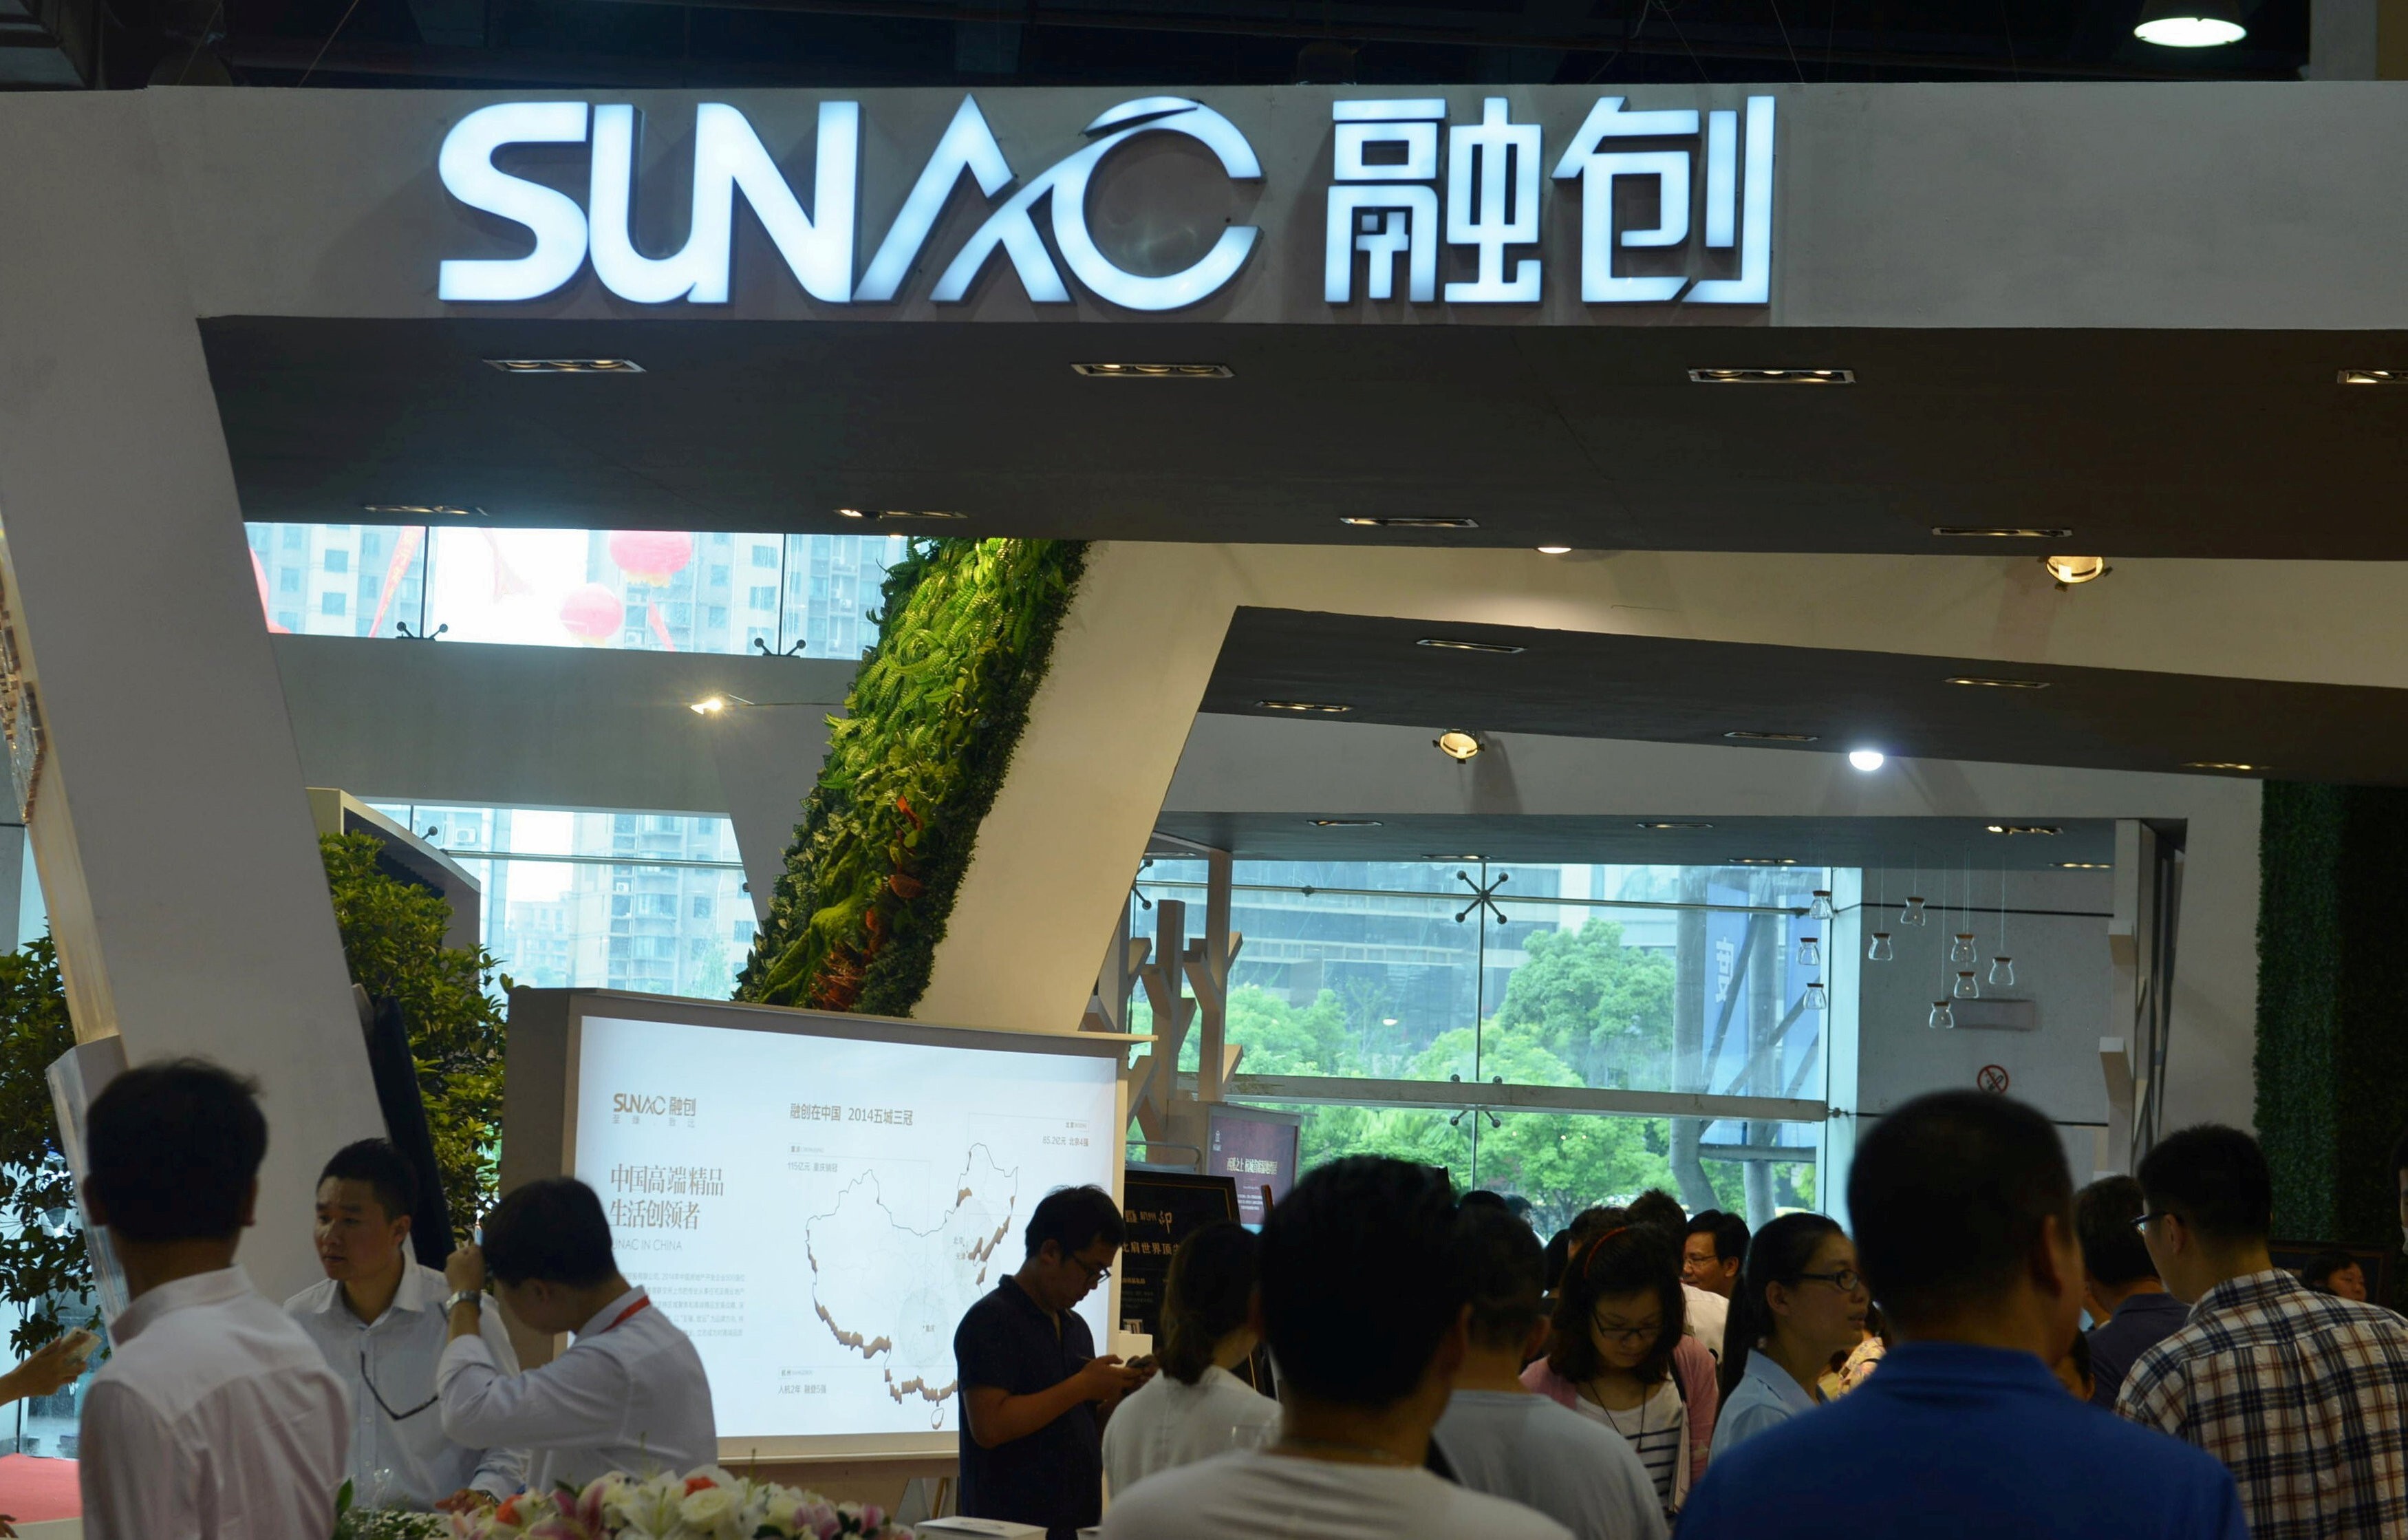 Sunac China Holdings’ logo during an exhibition in the Zhejiang provincial capital of Hangzhou on May 25, 2015. Photo: Reuters.